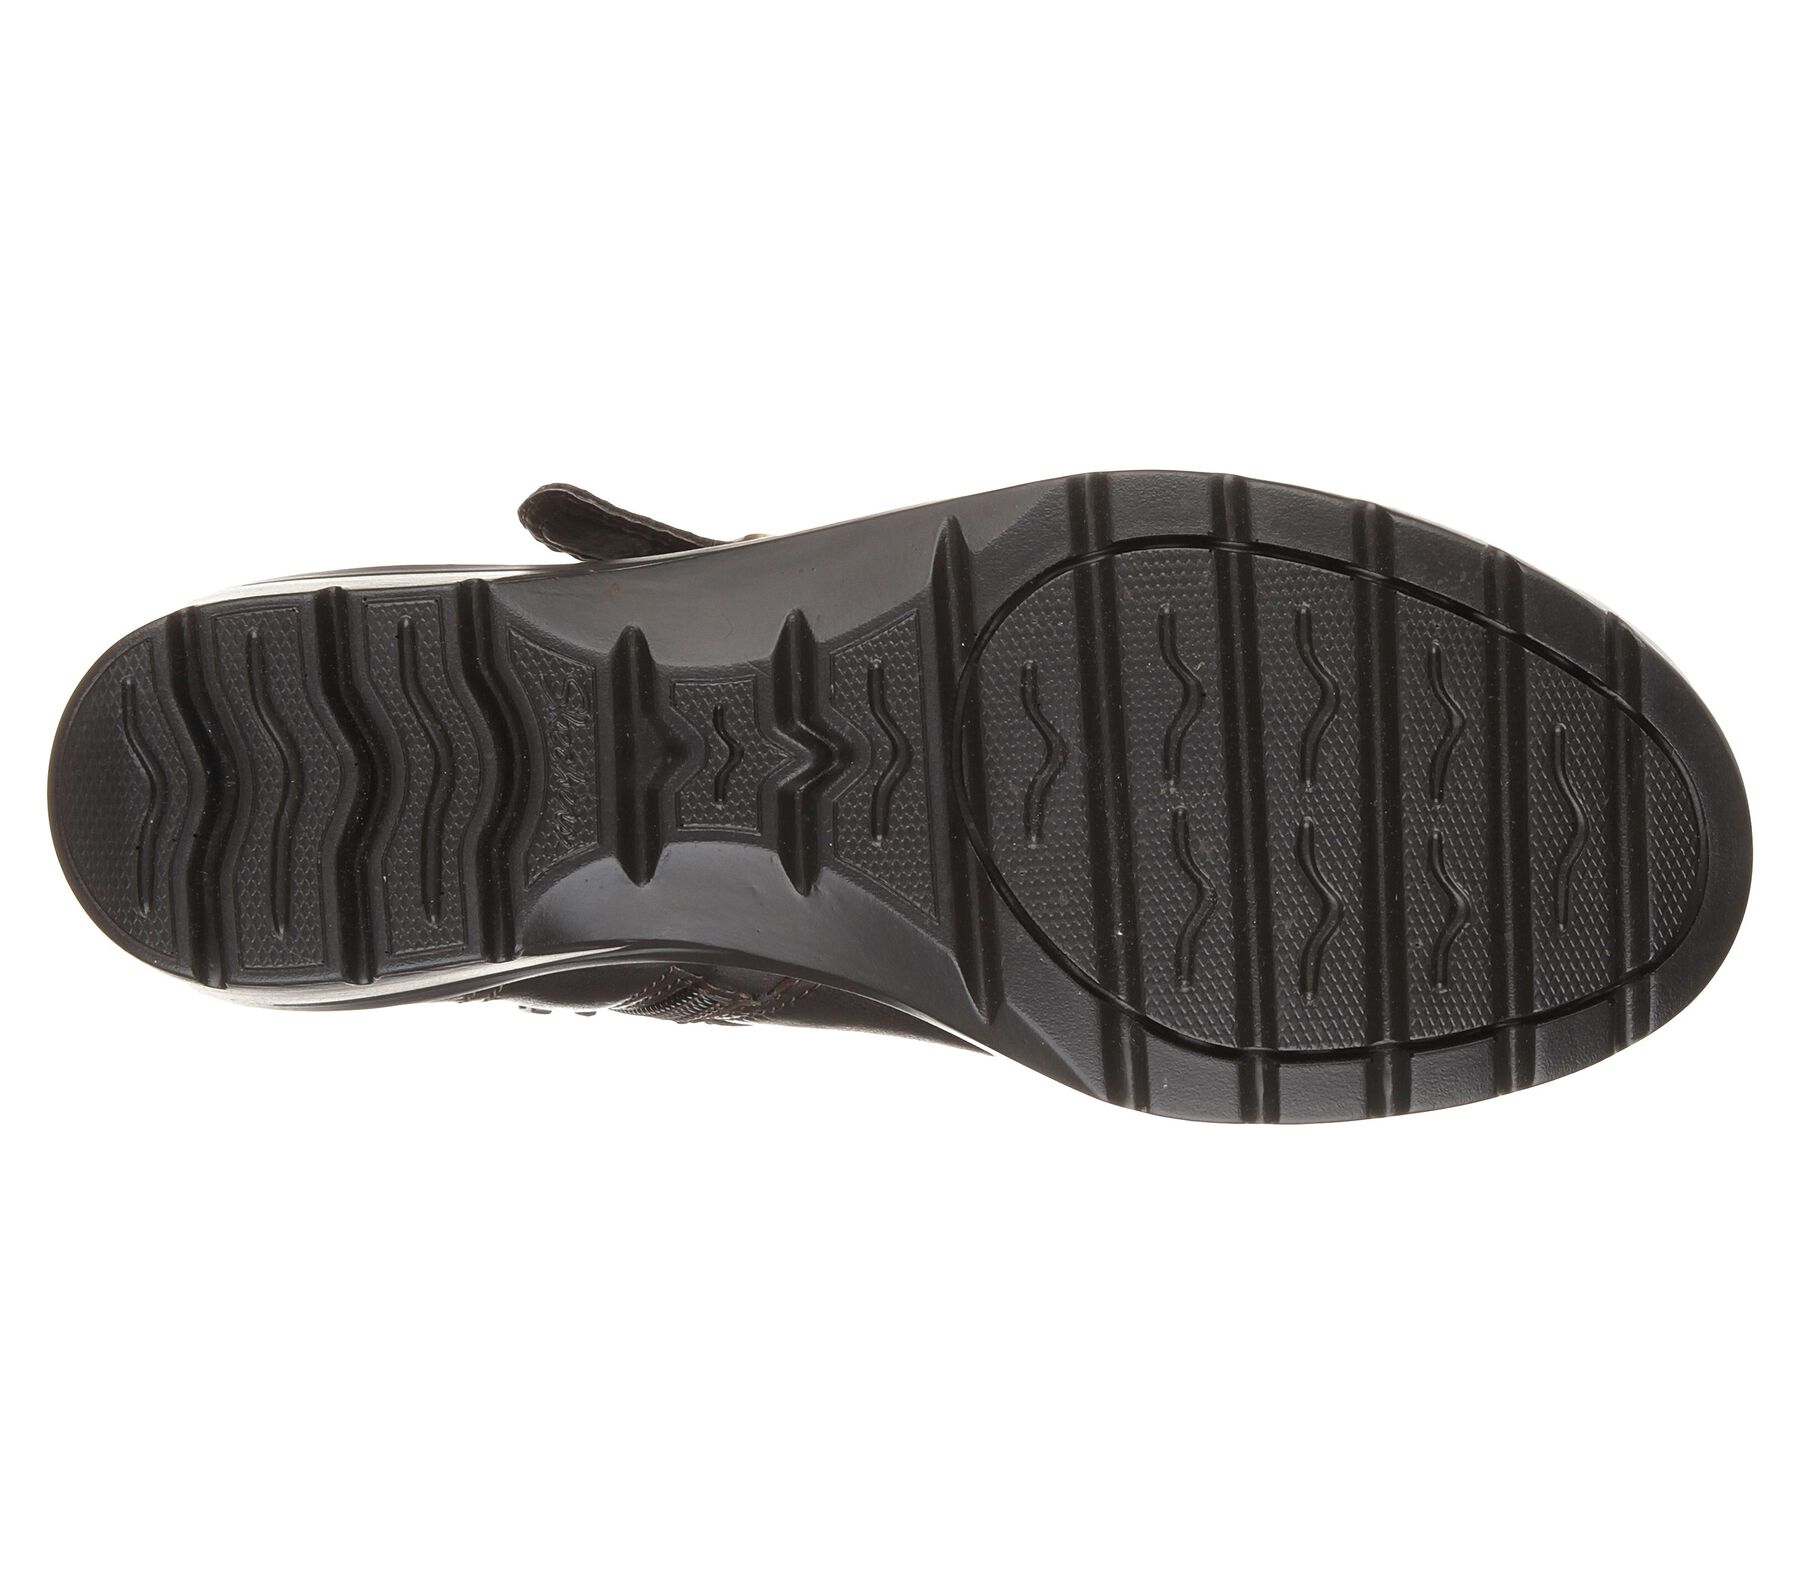 Shop the Relaxed Fit: Metronome - Mod Squad | SKECHERS